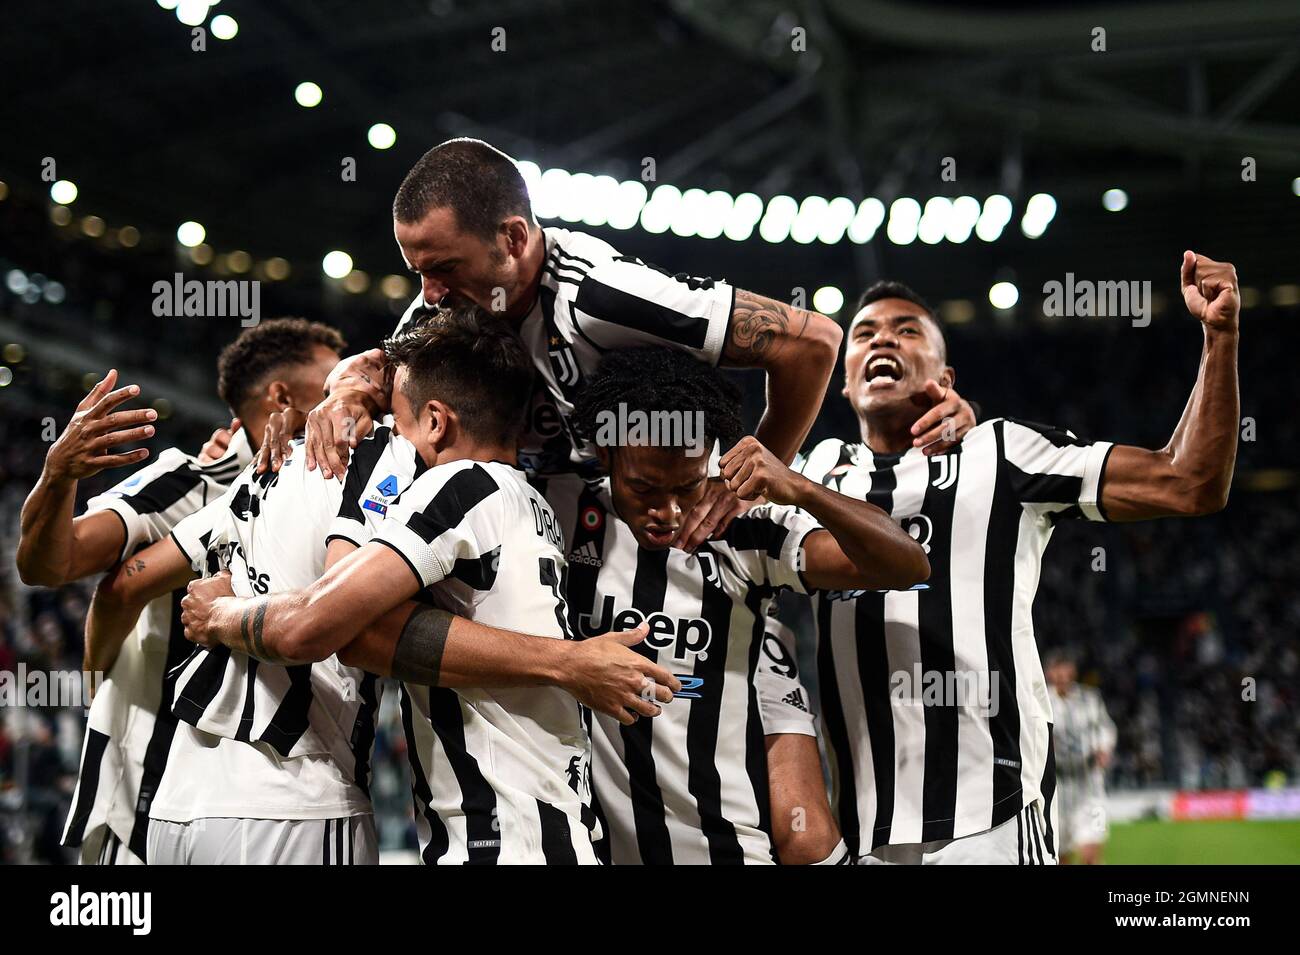 Turin, Italy. 19 September 2021. Alvaro Morata of Juventus FC celbrates with his teammates after scoring the opening goal during the Serie A football match between Juventus FC and AC Milan. Credit: Nicolò Campo/Alamy Live News Stock Photo